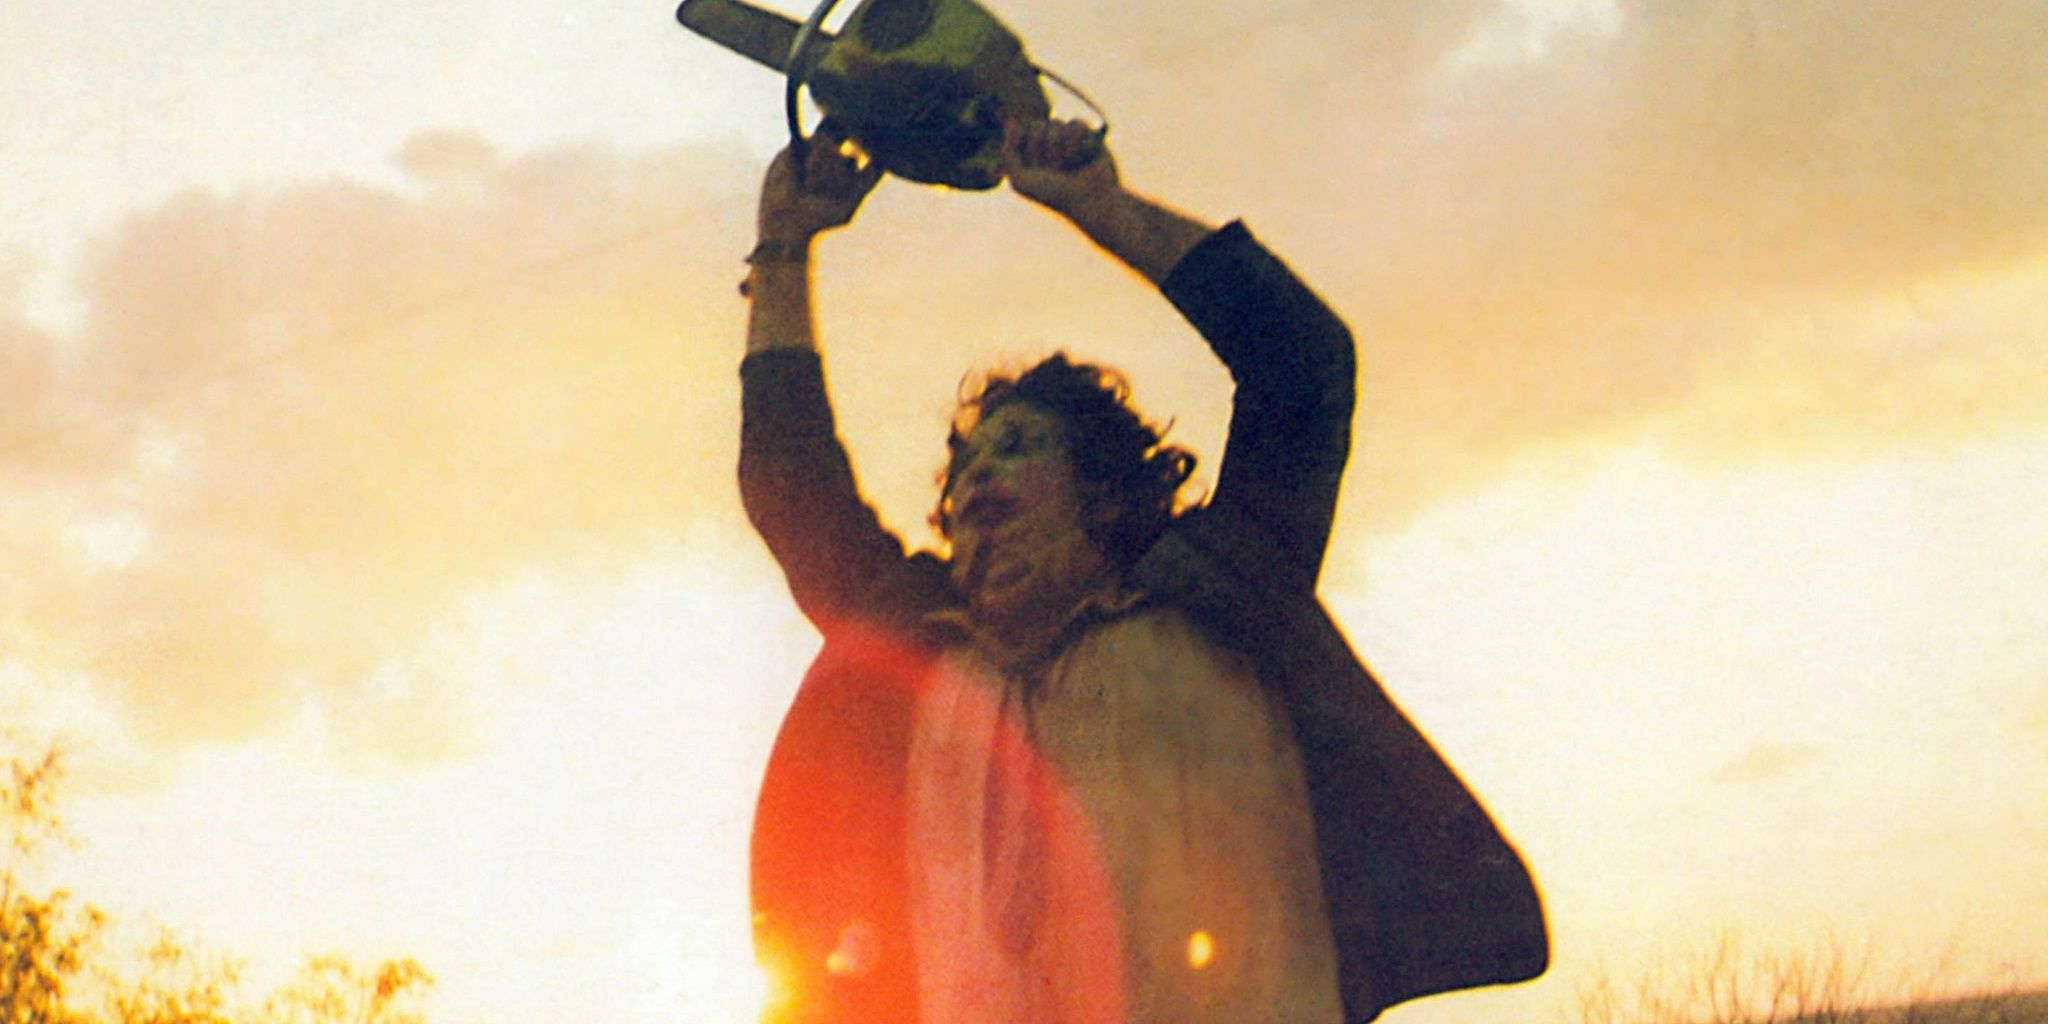 Leatherface in The Texas Chain Saw Massacre